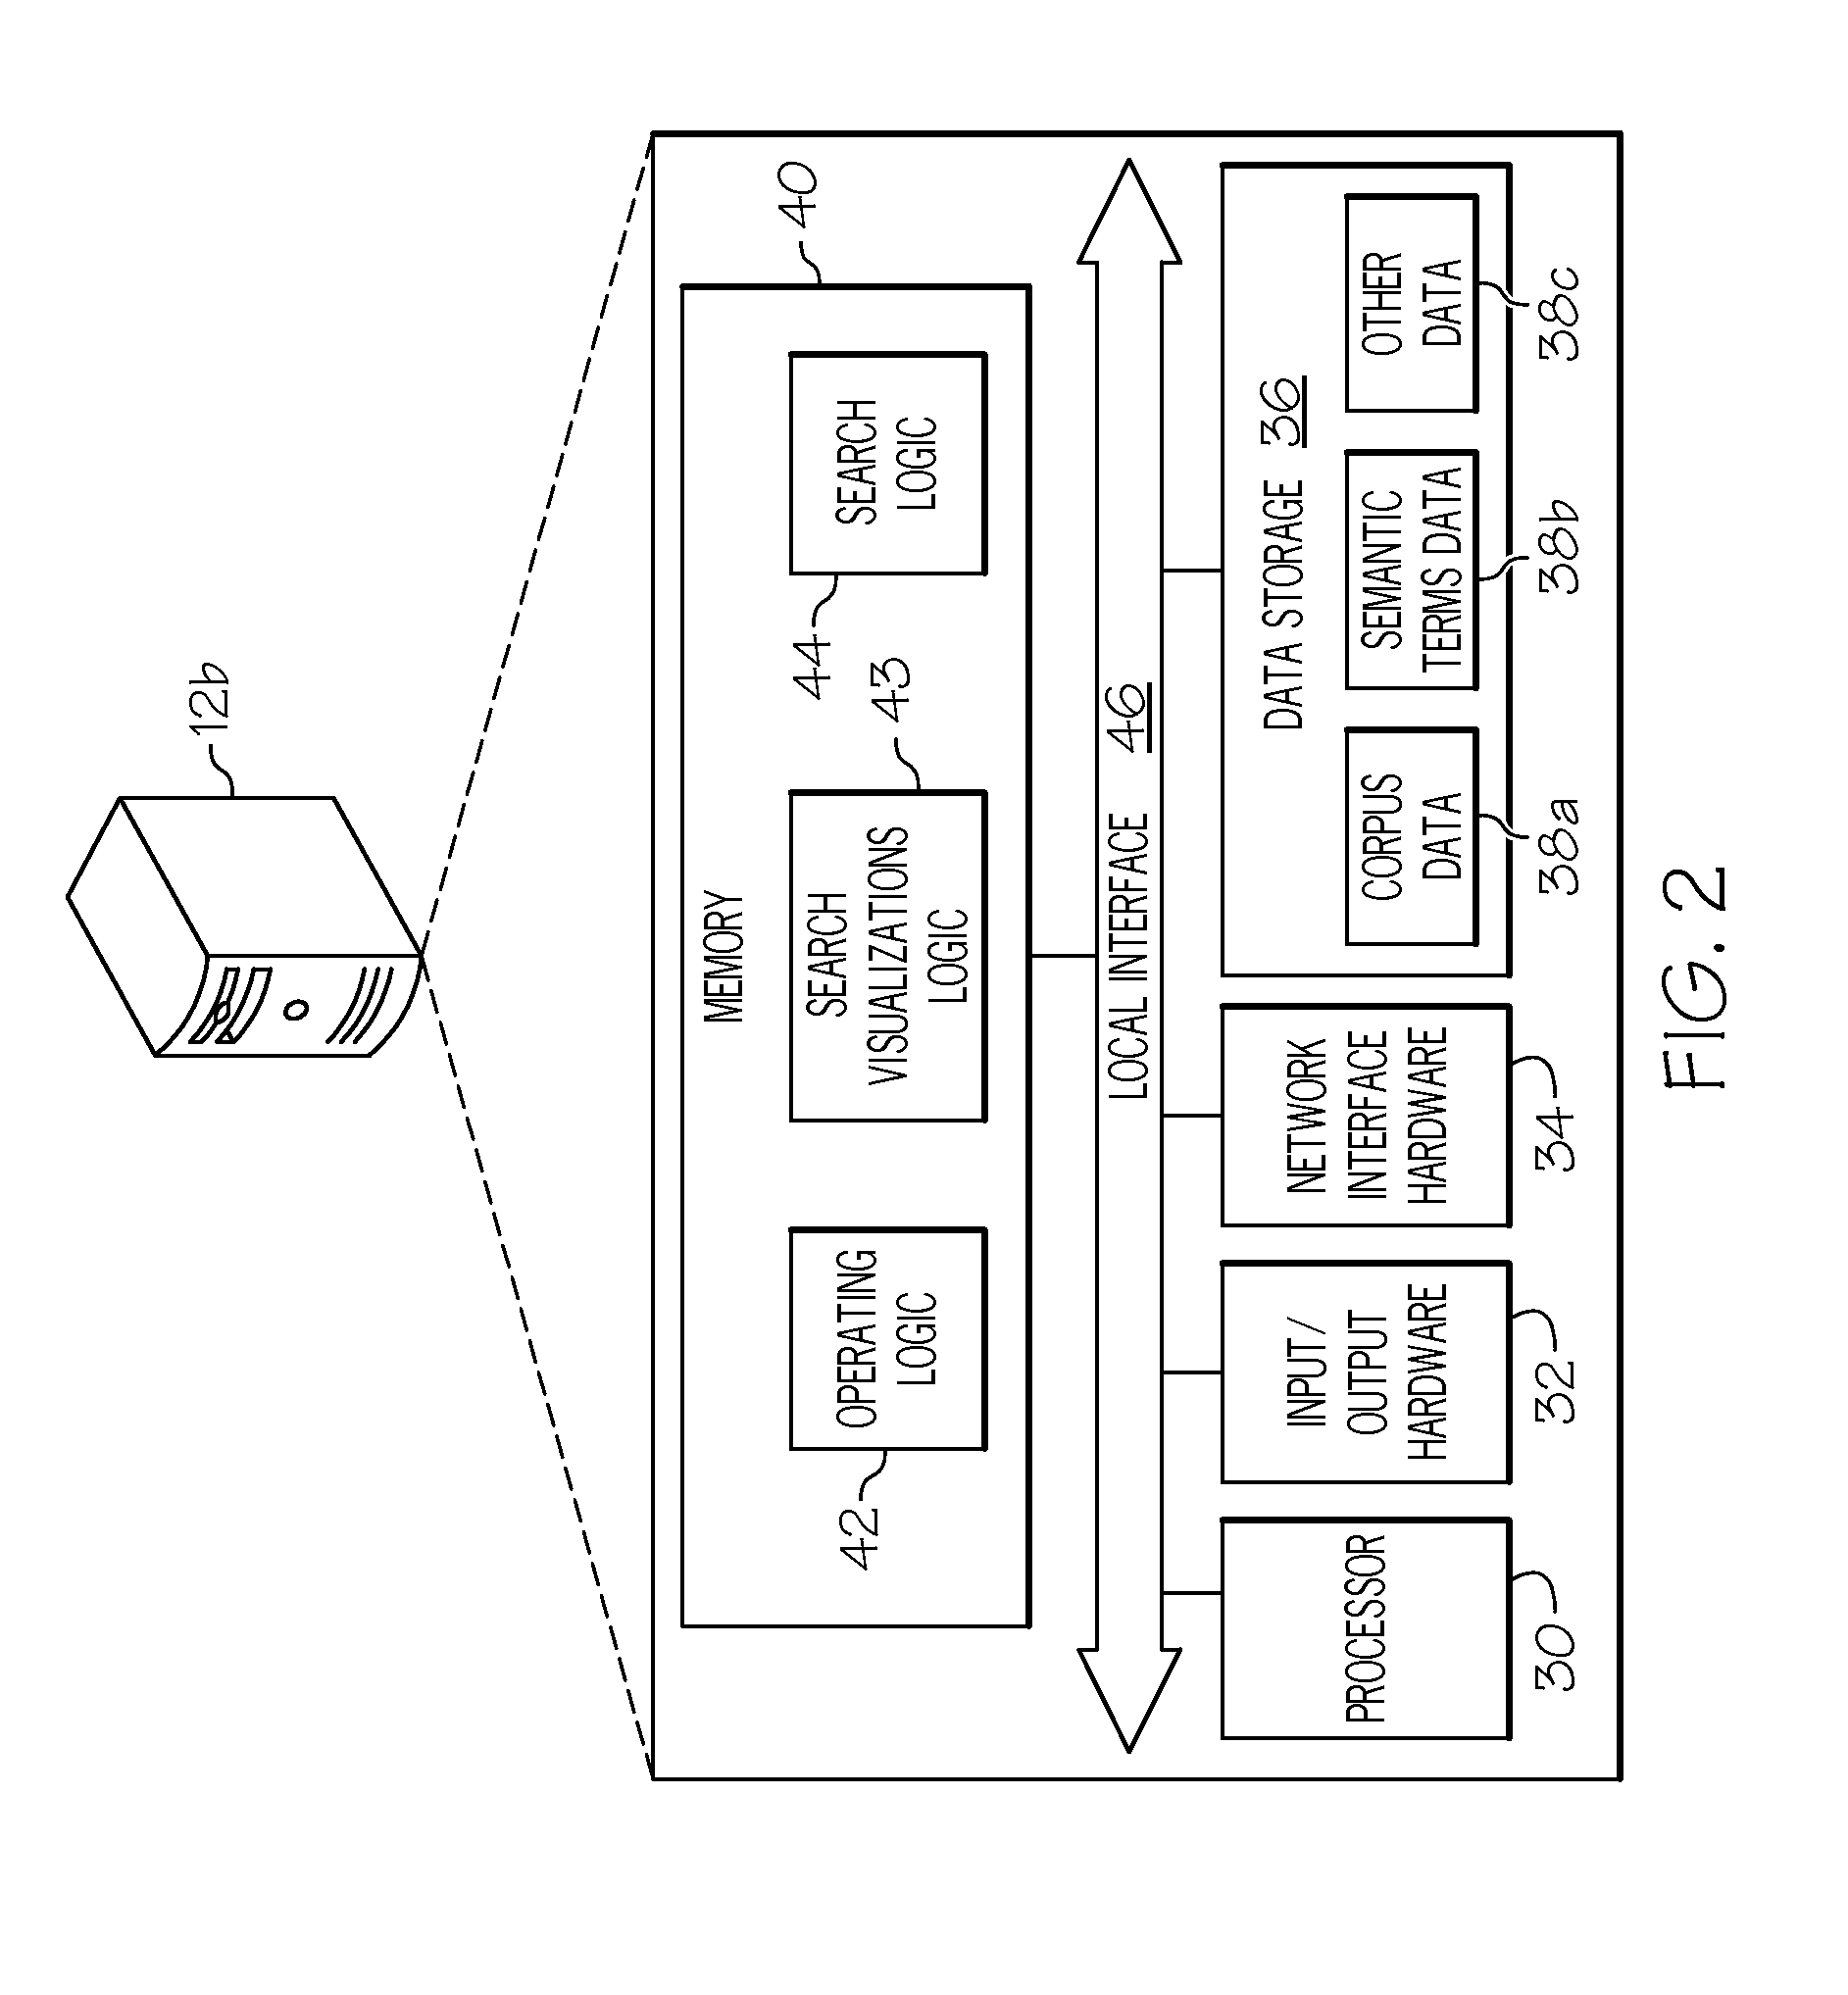 Methods for electronic document searching and graphically representing electronic document searches